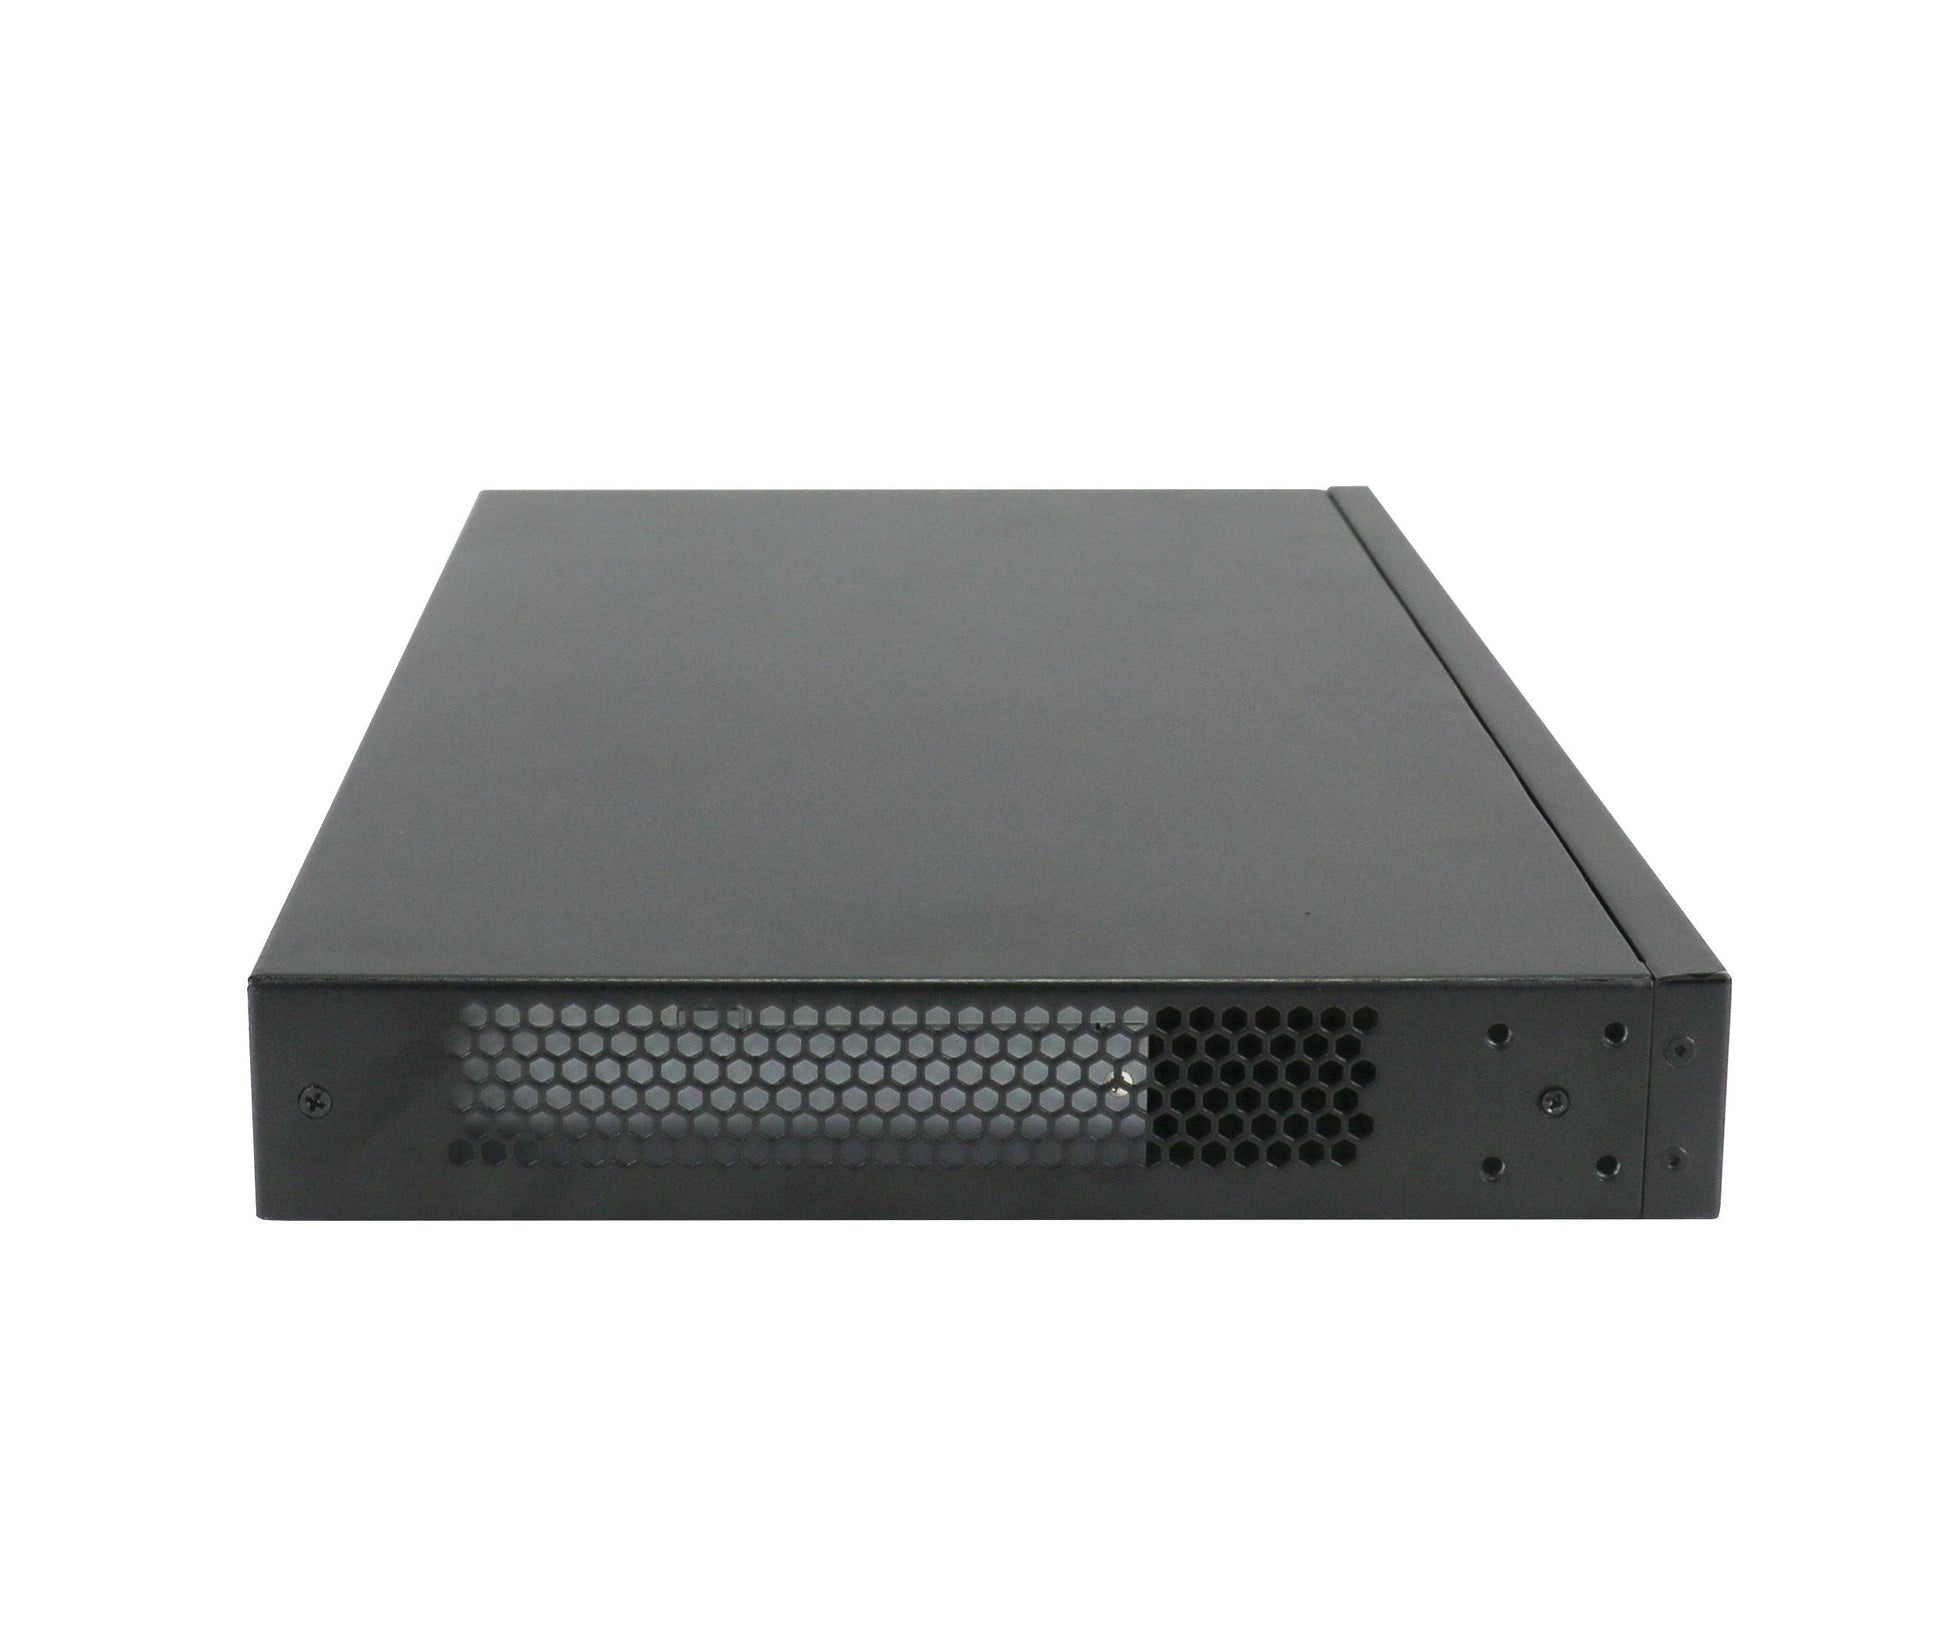 SecPoint Penetrator S9 - 32 IP Concurrent Scan License Vuln Scanning Appliance (1 Year License) - SecPoint